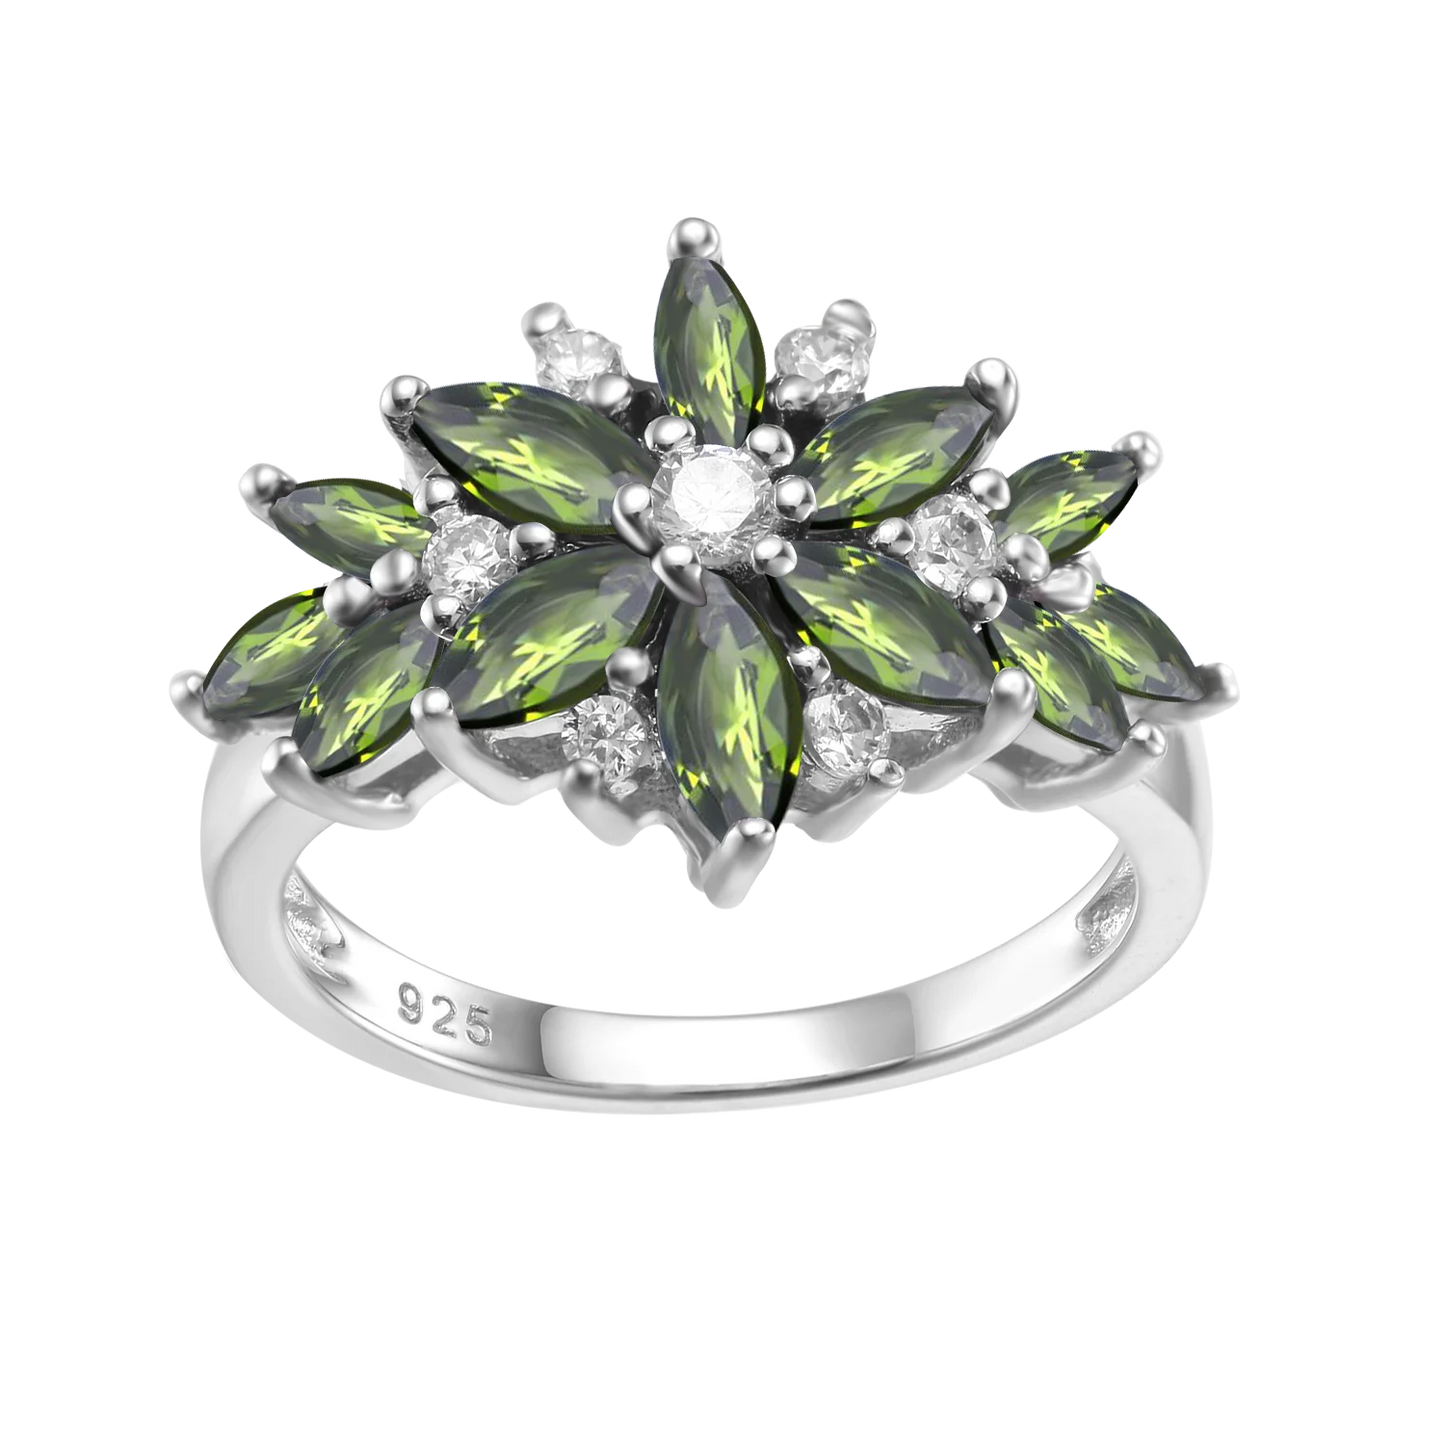 GEM'S BALLET Real 925 Sterling Silver Tourmaline Rings For Women Natural Gemstone Ring Romantic Gift Engagement Jewelry Chrome Diopside CHINA